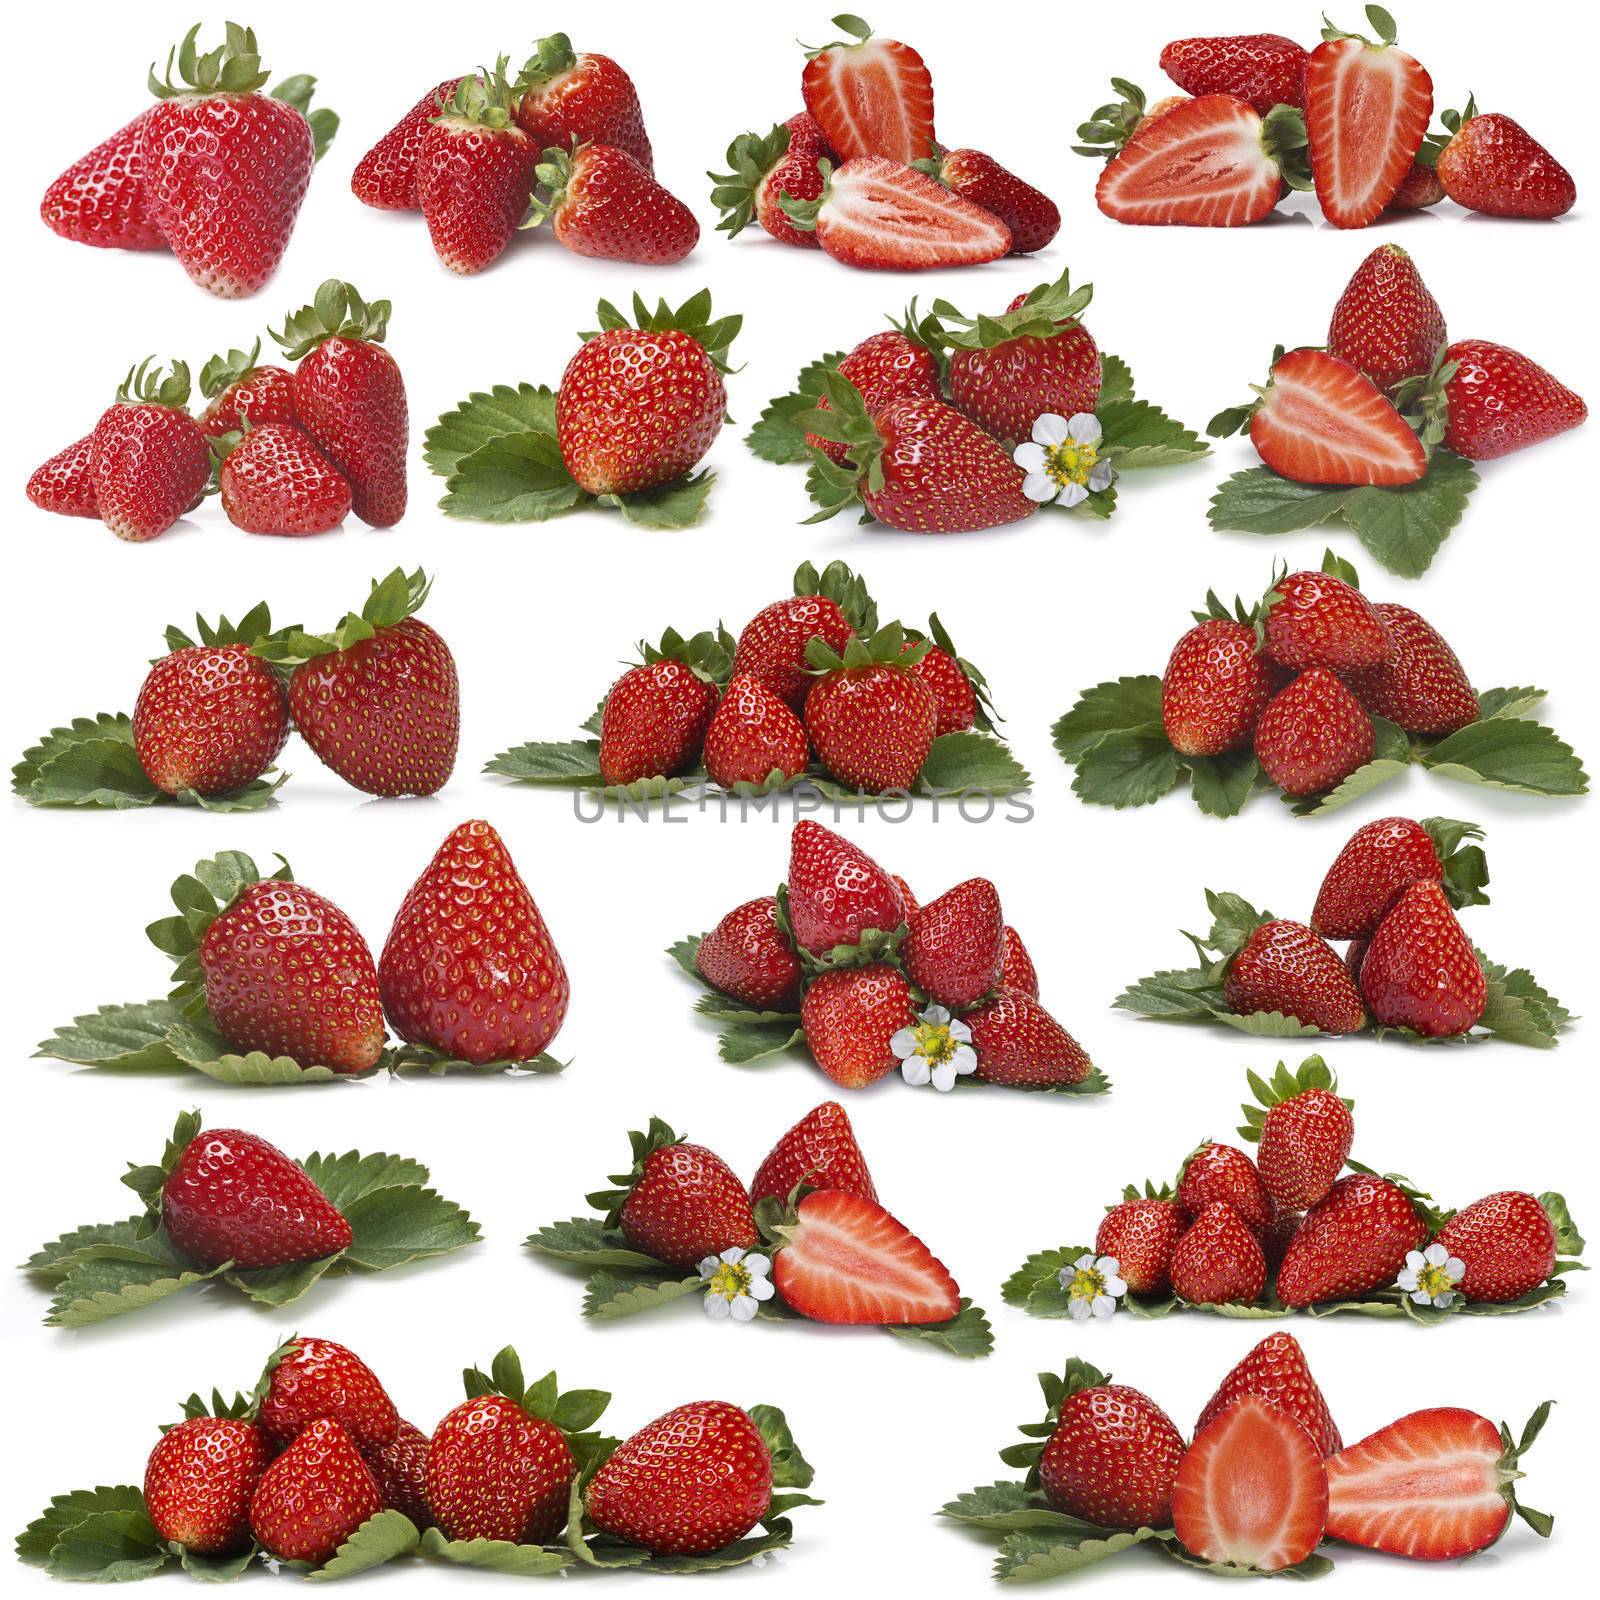 Great set of photographs of strawberries by angelsimon